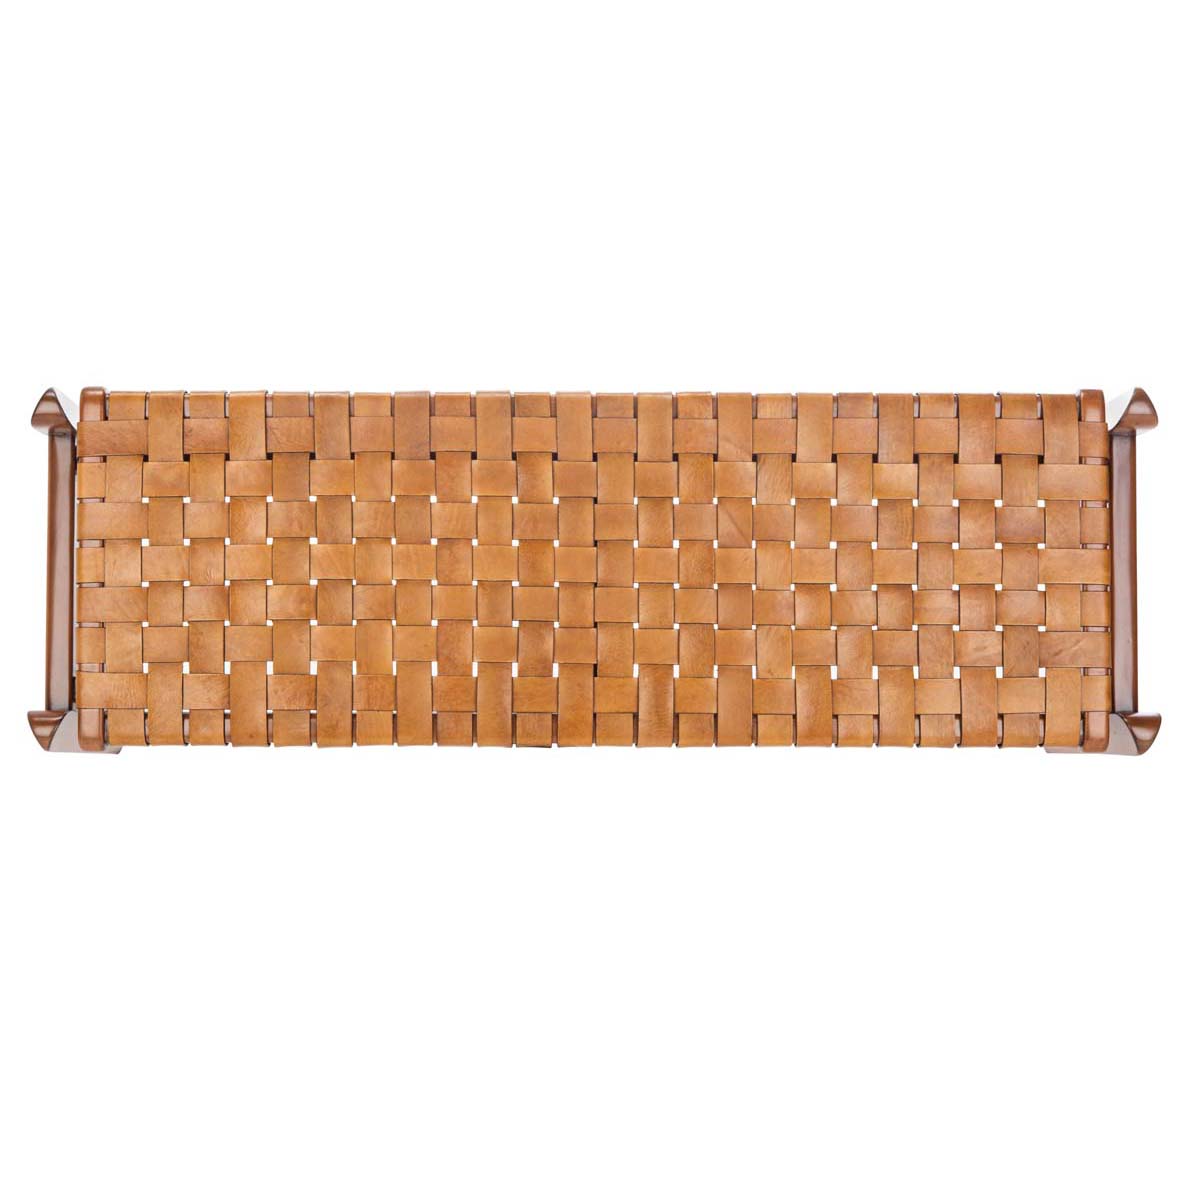 Safavieh Couture Dilan Leather Bench - Brown / Light Brown